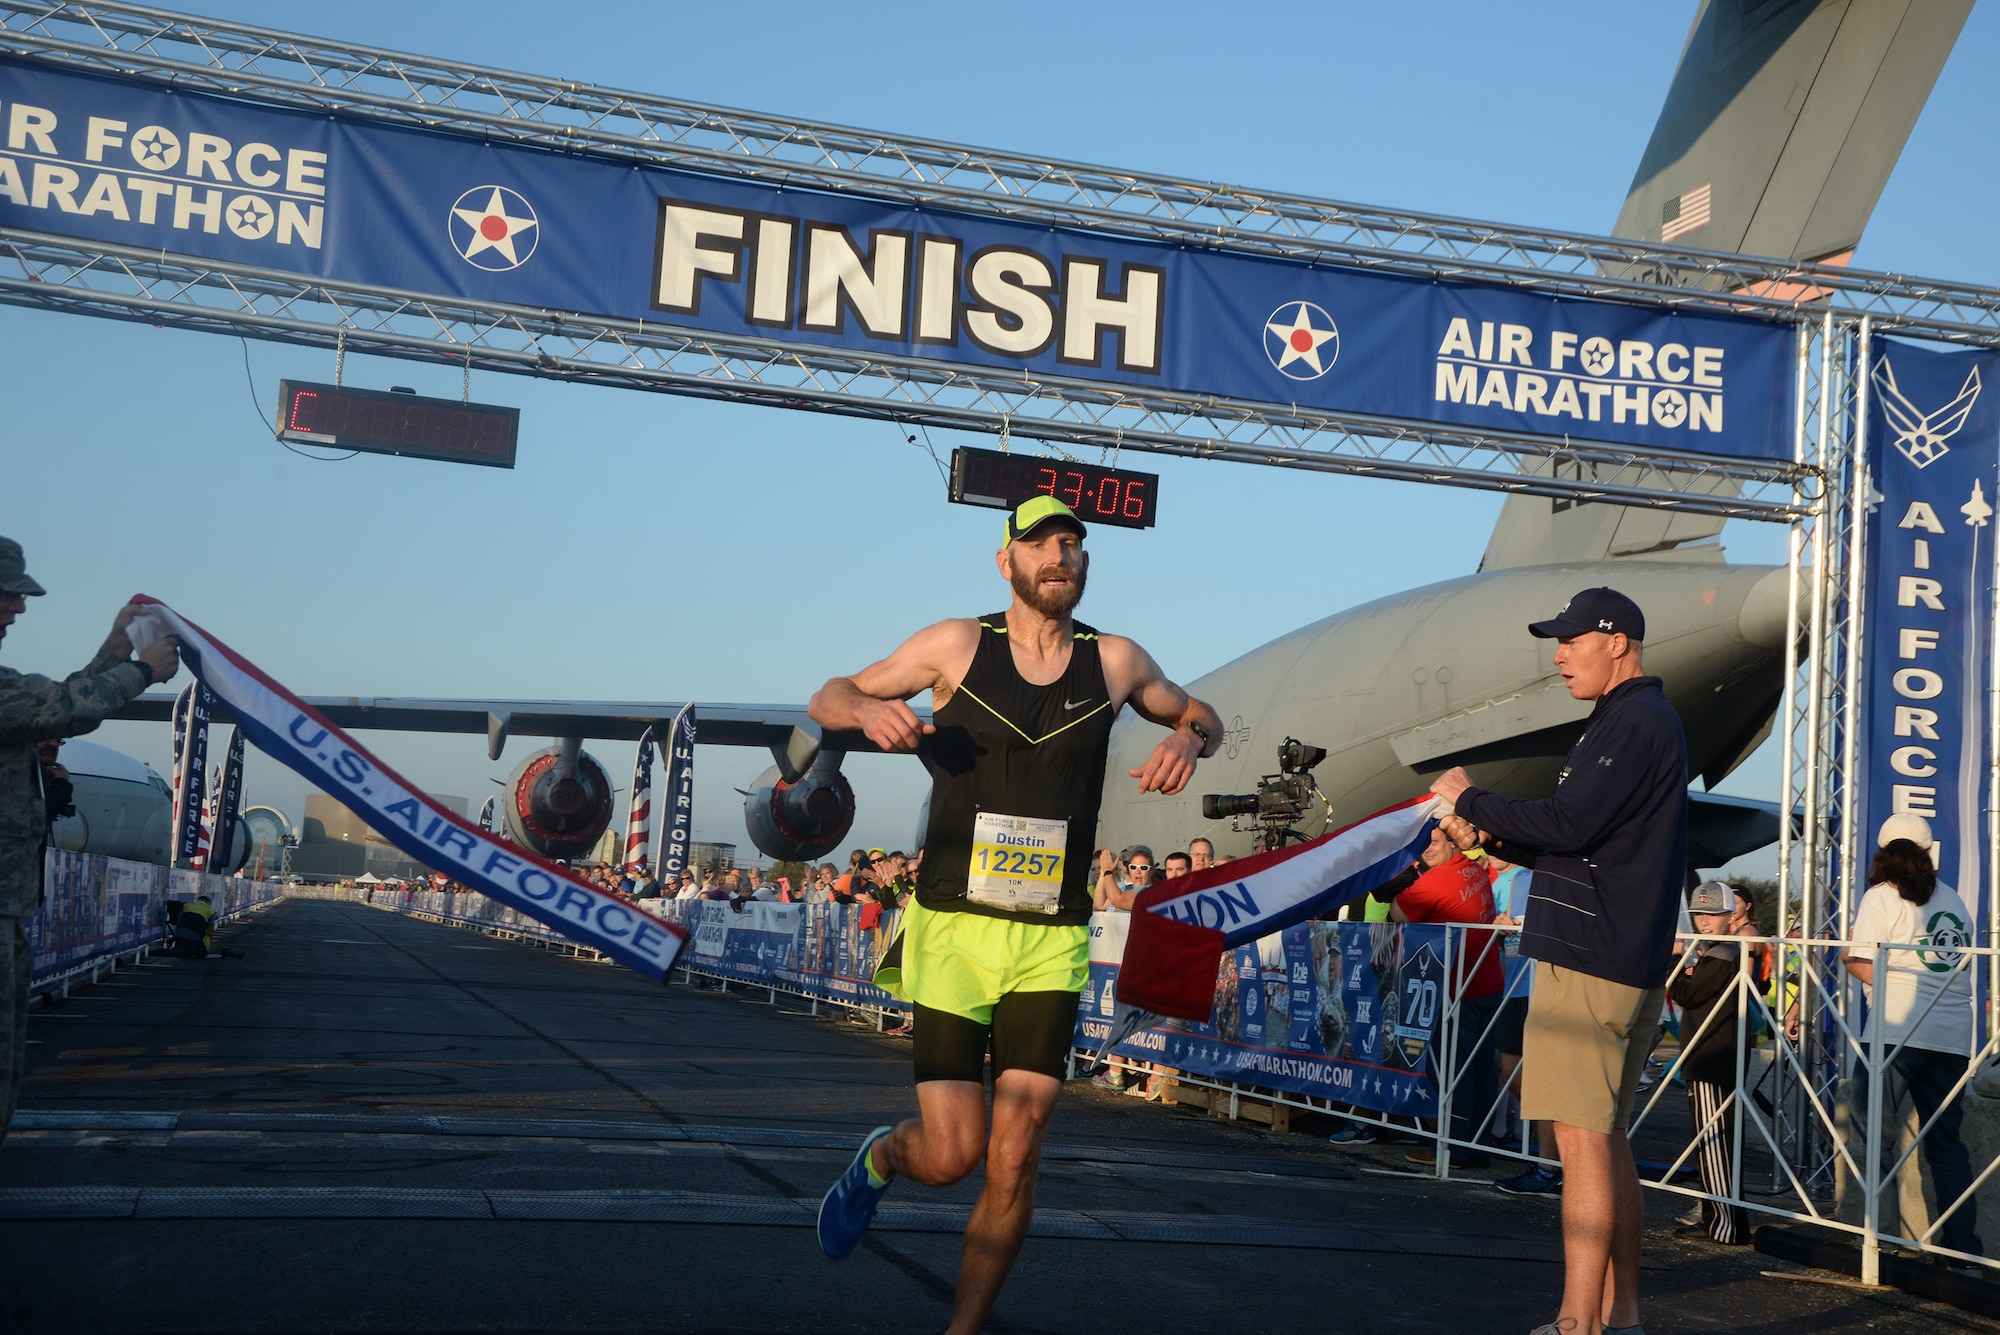 Dustin Sprague crosses the finish line as the overall men's winner of the 10K race at the 21st running of the 2017 U.S. Air Force Marathon at Wright-Patterson Air Force Base on Sept. 16.  Sprague, from Dayton, Ohio, finished with a time of 33:04.  (U.S. Air Force photo / R.J. Oriez)